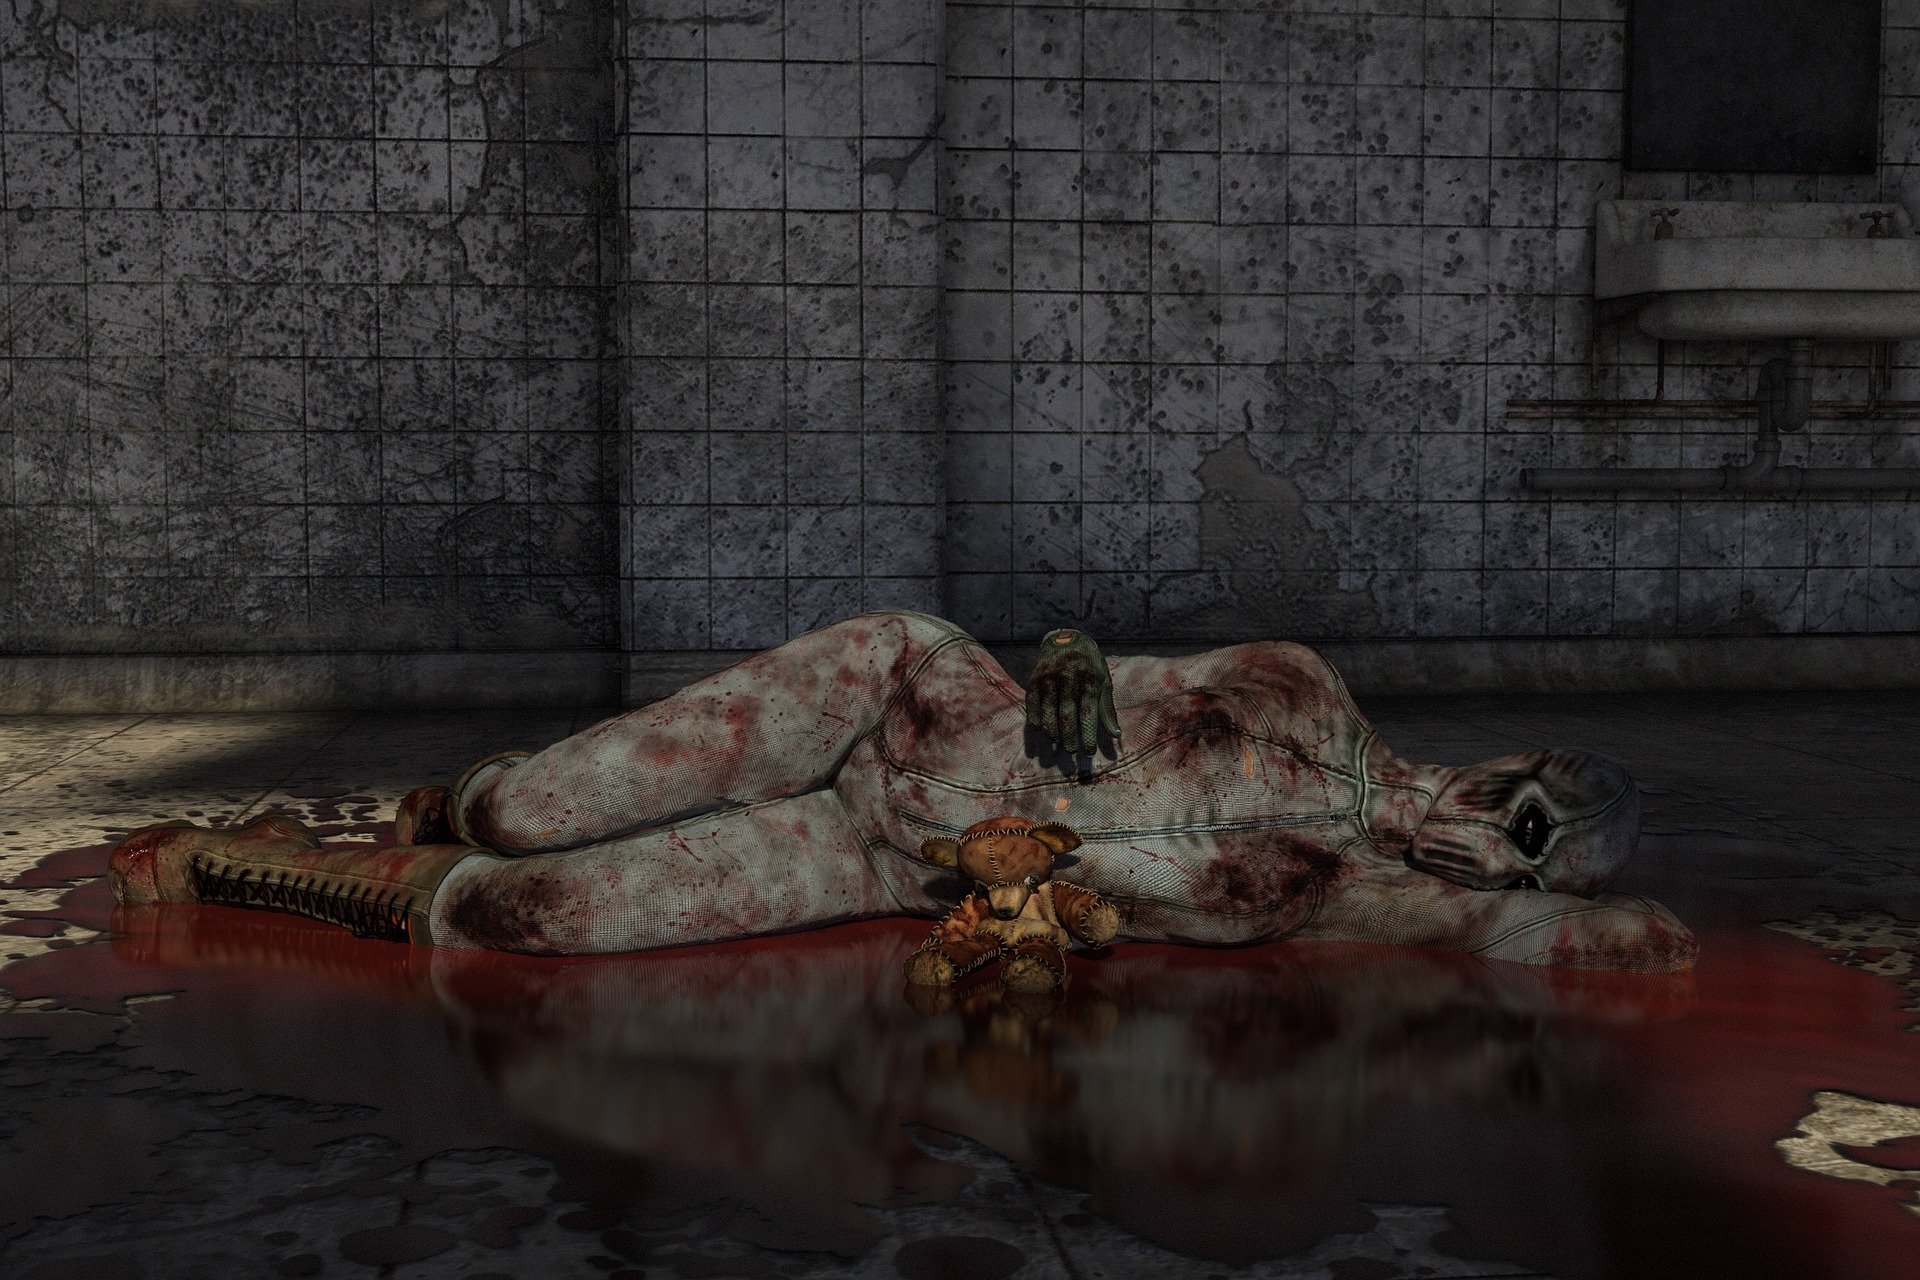 A horror scene of a disfigured woman lying on a kitchen floor in a pool of blood. A small teddy bear is next to her.